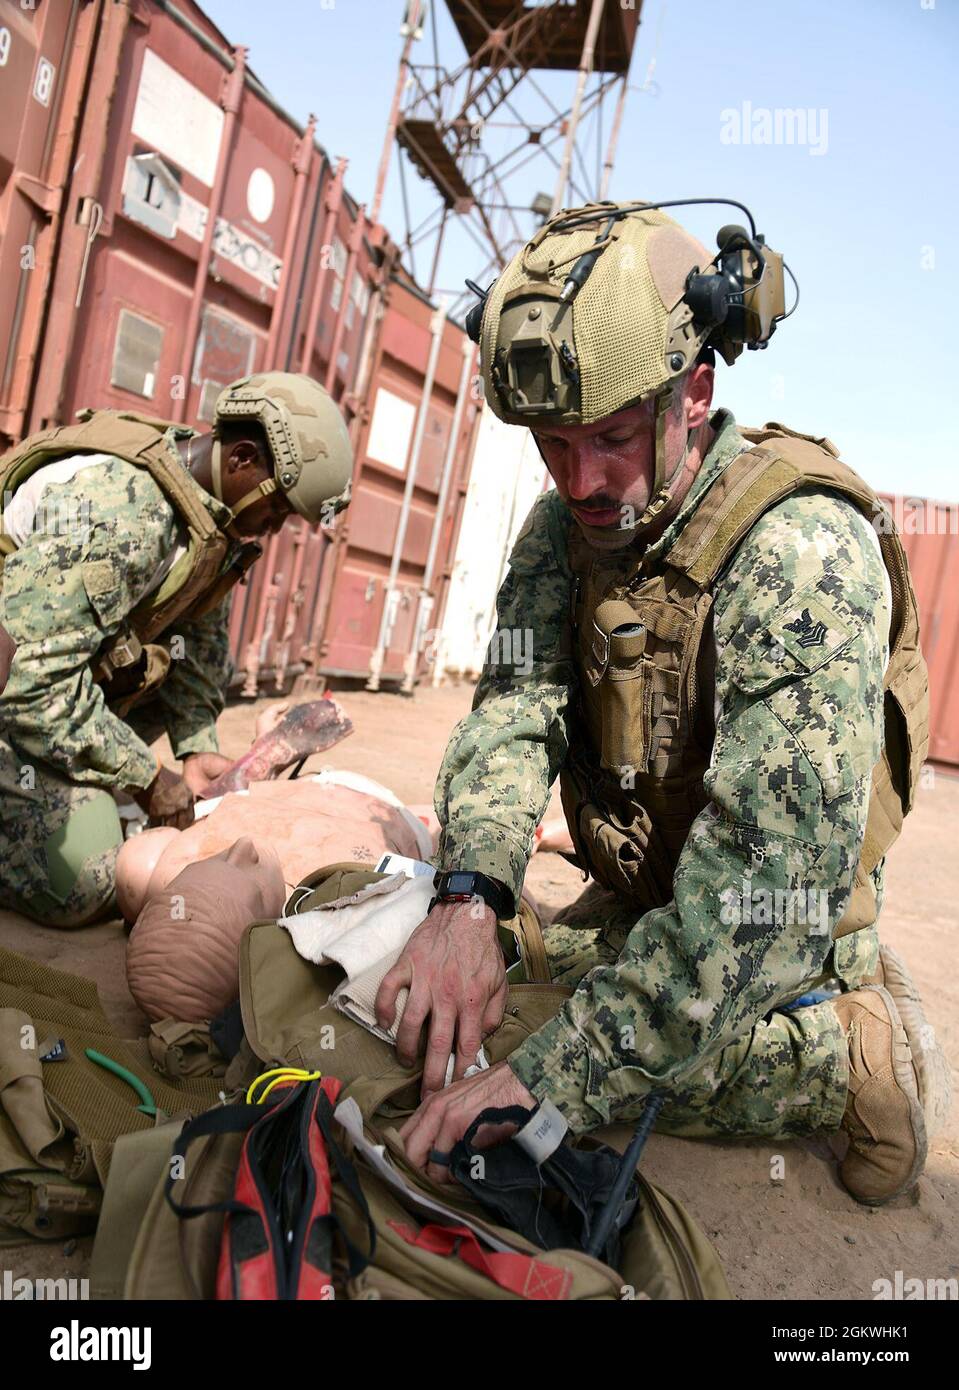 CAMP LEMMONIER, Djibouti (July 10, 2021)  U.S. Navy Information Systems Technician 2nd Class Raymond Edwards from Houston and Gunner's Mate 1st Class David Sewell from Postfalls, Id. apply combat field care to a mannequin during Tactical Combat Casualty Care (TCCC) training taught by U.S. Navy Maritime Expeditionary Security Squadron 11 (MSRON 11). TCCC was developed by the U.S. Department of Defense, Defense Health Agency (DHA) Joint Trauma System to teach evidence-based, life-saving techniques and strategies for providing the best trauma care on the battlefield. While there is no replacement Stock Photo